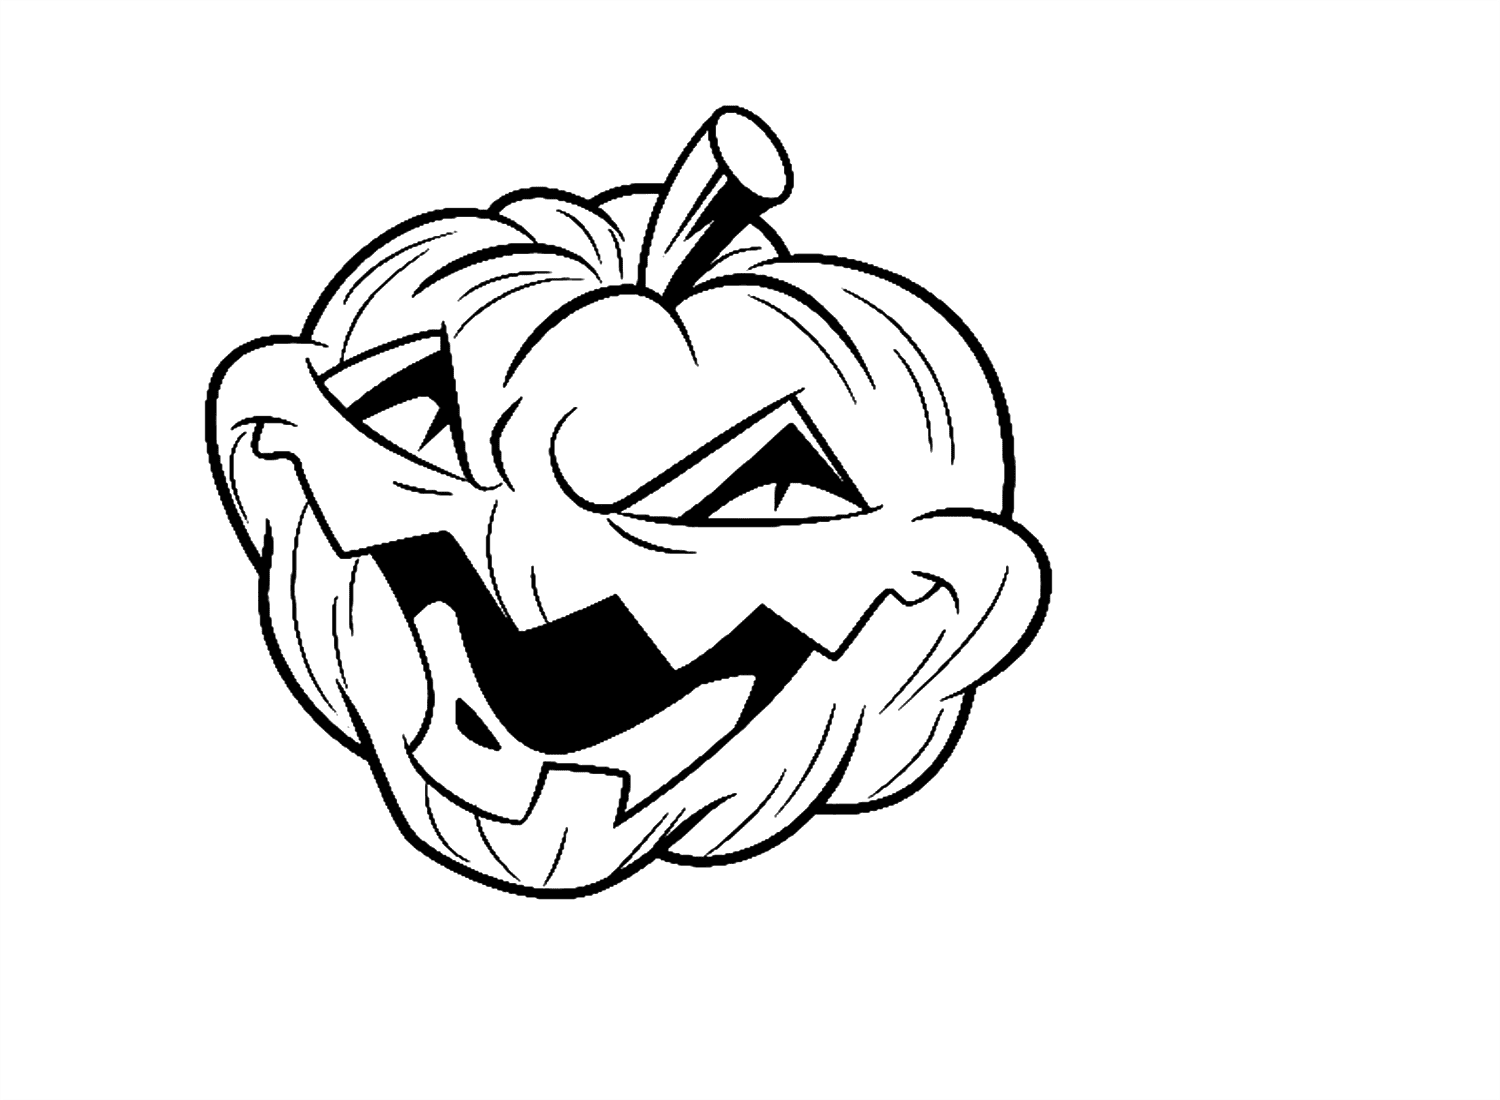 Scary Halloween Jack O’ Lantern Coloring Pages